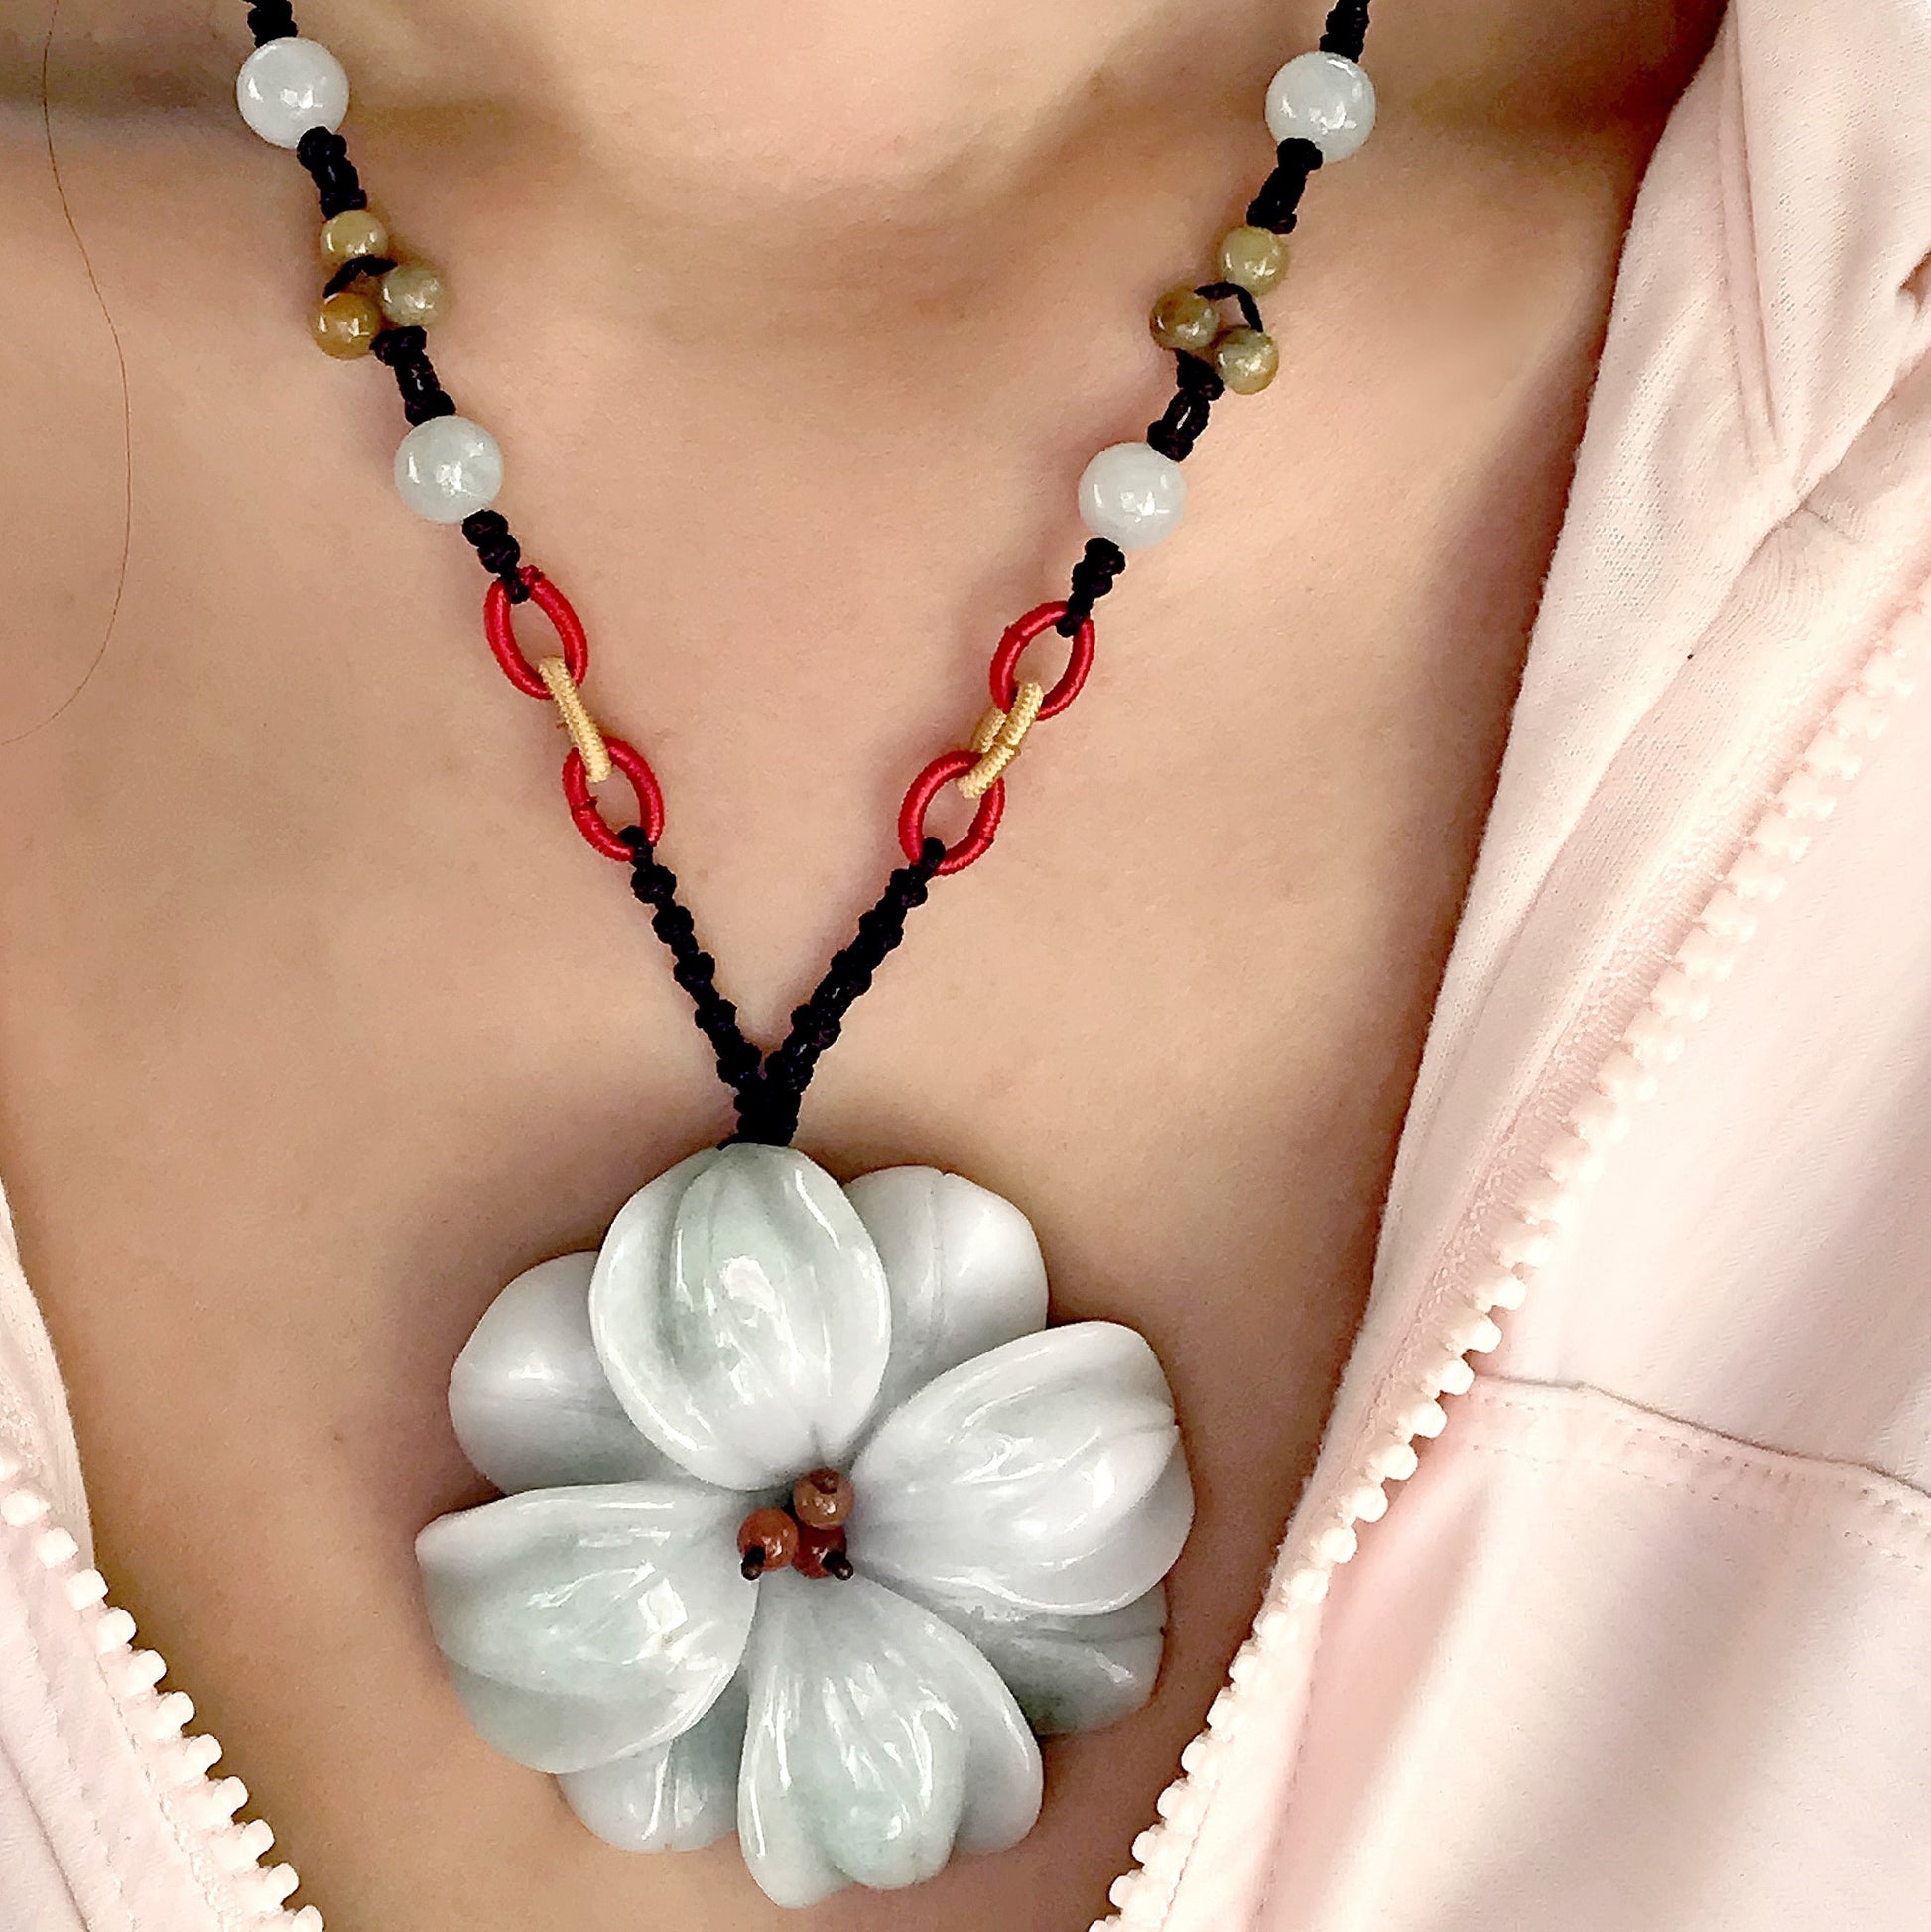 Stand Out and Shine with a Unique Dogwood Flower Jade Pendant made with Black Cord